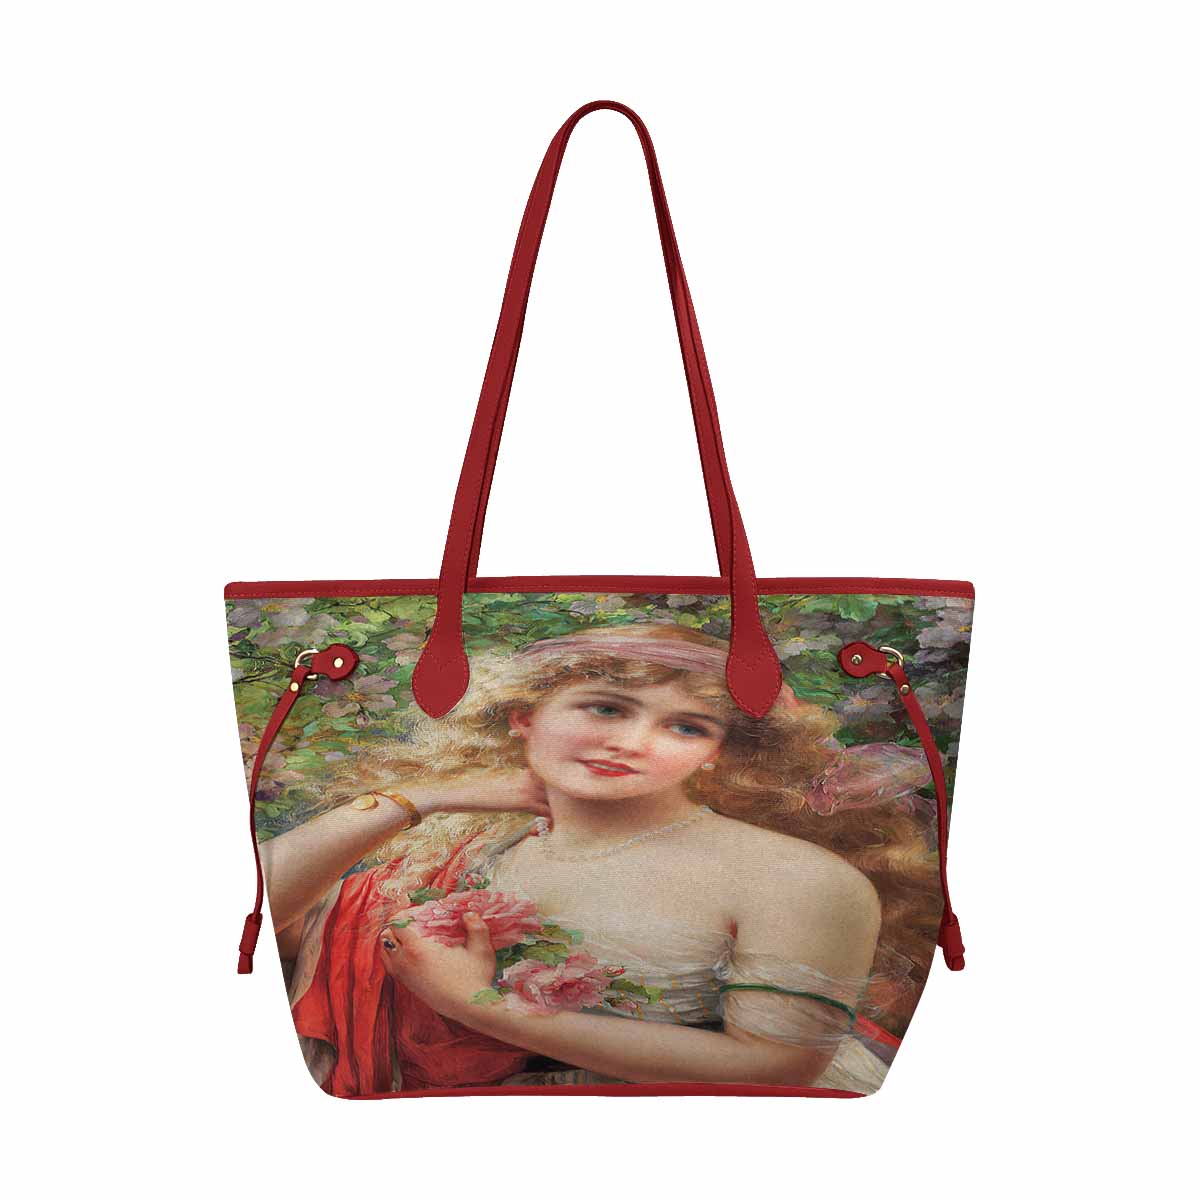 Victorian Lady Design Handbag, Model 1695361, Young Lady With Roses, RED TRIM